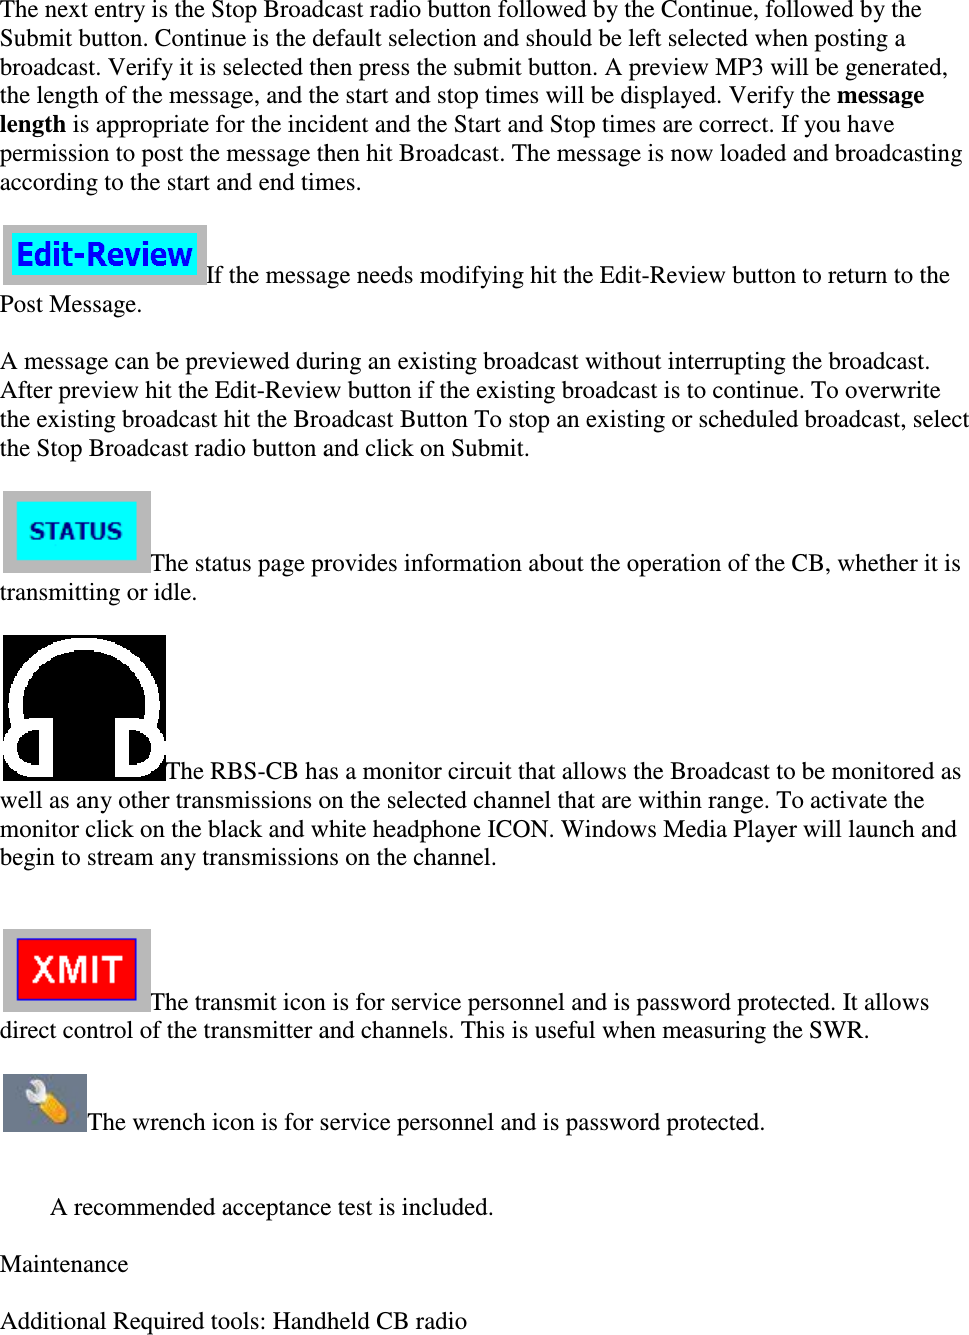 The next entry is the Stop Broadcast radio button followed by the Continue, followed by the Submit button. Continue is the default selection and should be left selebroadcast. Verify it is selected then press the submit button. A preview MP3 will be generated, the length of the message, and the start and stop times will be displayed. Verify the length is appropriate for the incident and thepermission to post the message then hit Broadcast. The message is now loaded and broadcasting according to the start and end times. If the message needs modifying hit the EditPost Message.  A message can be previewed during an existing broadcast without interrupting the broadcast. After preview hit the Edit-Review button if the existing broadcast is to continue. To overwrite the existing broadcast hit the Broadcast Button To stthe Stop Broadcast radio button and click on Submit.  The status page provides information about the operation of the CB, whether it is transmitting or idle.   The RBS-CB has a monitor circuit that allows thwell as any other transmissions on the selected channel that are within range. To activate the monitor click on the black and white headphone ICONbegin to stream any transmissions on the  The transmit icon is for service direct control of the transmitter and channels. This is useful when measuring the SWR.  The wrench icon is for service  A recommended acceptance  Maintenance   Additional Required tools: Handheld CB radio The next entry is the Stop Broadcast radio button followed by the Continue, followed by the Submit button. Continue is the default selection and should be left selected when posting a broadcast. Verify it is selected then press the submit button. A preview MP3 will be generated, the length of the message, and the start and stop times will be displayed. Verify the is appropriate for the incident and the Start and Stop times are correct. If you have permission to post the message then hit Broadcast. The message is now loaded and broadcasting according to the start and end times. If the message needs modifying hit the Edit-Review button to return to the A message can be previewed during an existing broadcast without interrupting the broadcast. Review button if the existing broadcast is to continue. To overwrite the existing broadcast hit the Broadcast Button To stop an existing or scheduled broadcast, select the Stop Broadcast radio button and click on Submit.  The status page provides information about the operation of the CB, whether it is CB has a monitor circuit that allows the Broadcast to be monitored as well as any other transmissions on the selected channel that are within range. To activate the monitor click on the black and white headphone ICON. Windows Media Player will launch and begin to stream any transmissions on the channel.  The transmit icon is for service personnel and is password protected. It allows direct control of the transmitter and channels. This is useful when measuring the SWR. The wrench icon is for service personnel and is password protected.  A recommended acceptance test is included.  tools: Handheld CB radio  The next entry is the Stop Broadcast radio button followed by the Continue, followed by the cted when posting a broadcast. Verify it is selected then press the submit button. A preview MP3 will be generated, the length of the message, and the start and stop times will be displayed. Verify the message Start and Stop times are correct. If you have permission to post the message then hit Broadcast. The message is now loaded and broadcasting Review button to return to the A message can be previewed during an existing broadcast without interrupting the broadcast. Review button if the existing broadcast is to continue. To overwrite op an existing or scheduled broadcast, select The status page provides information about the operation of the CB, whether it is e Broadcast to be monitored as well as any other transmissions on the selected channel that are within range. To activate the . Windows Media Player will launch and and is password protected. It allows direct control of the transmitter and channels. This is useful when measuring the SWR.  